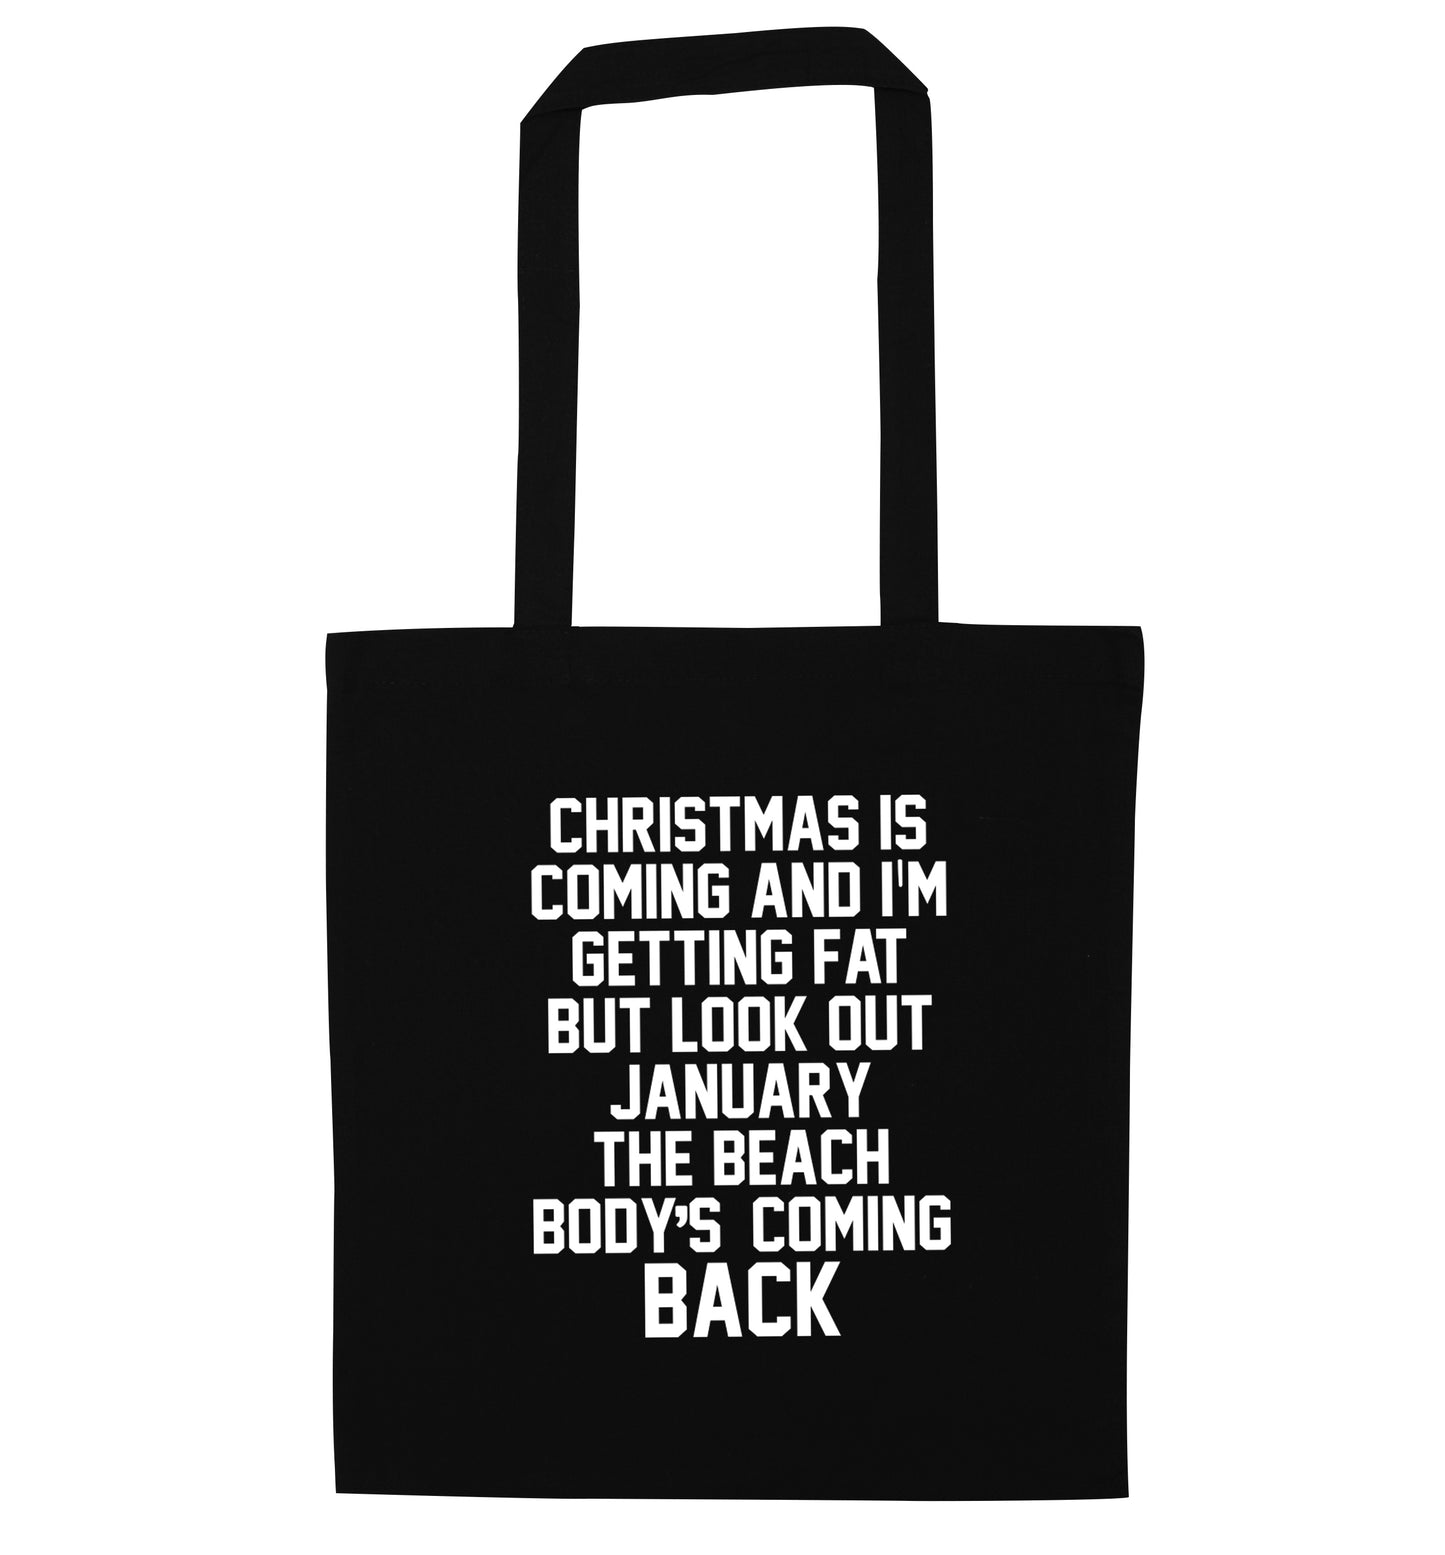 Christmas is coming and I'm getting fat but look out January the beach body's coming back! black tote bag